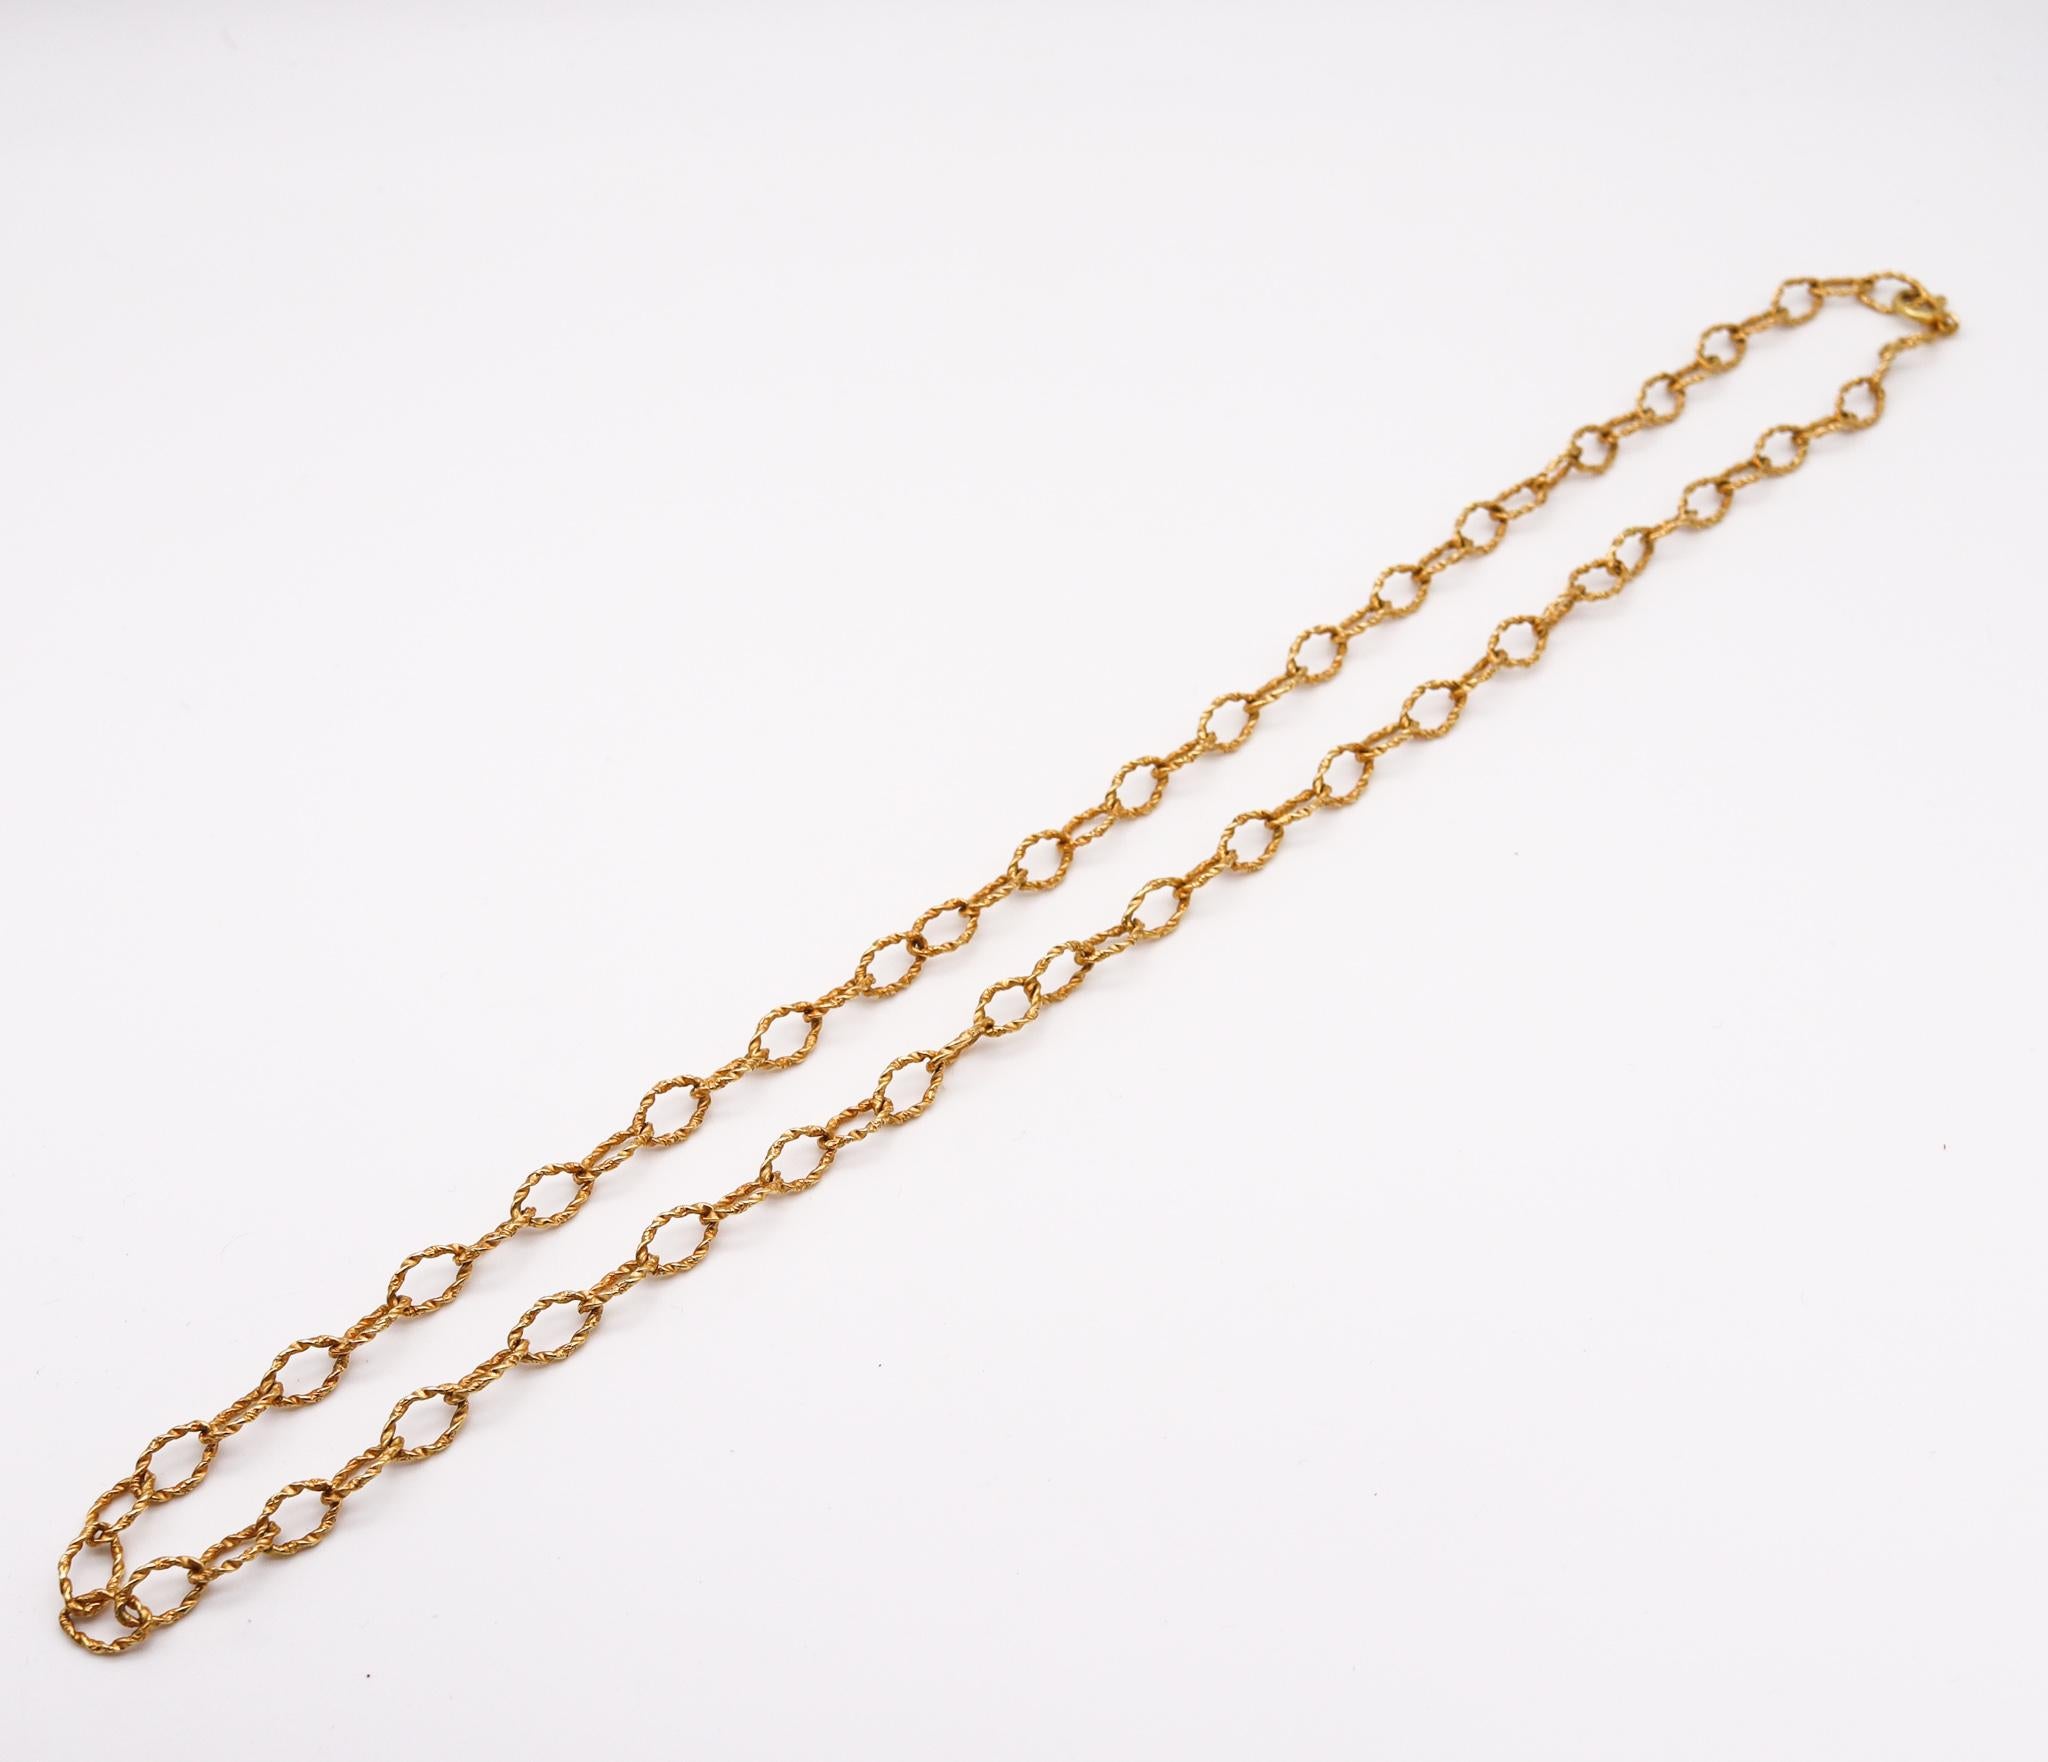 Italian Retro 1970 Modernist Long Chain with Textured Links in 18Kt Yellow Gold 2